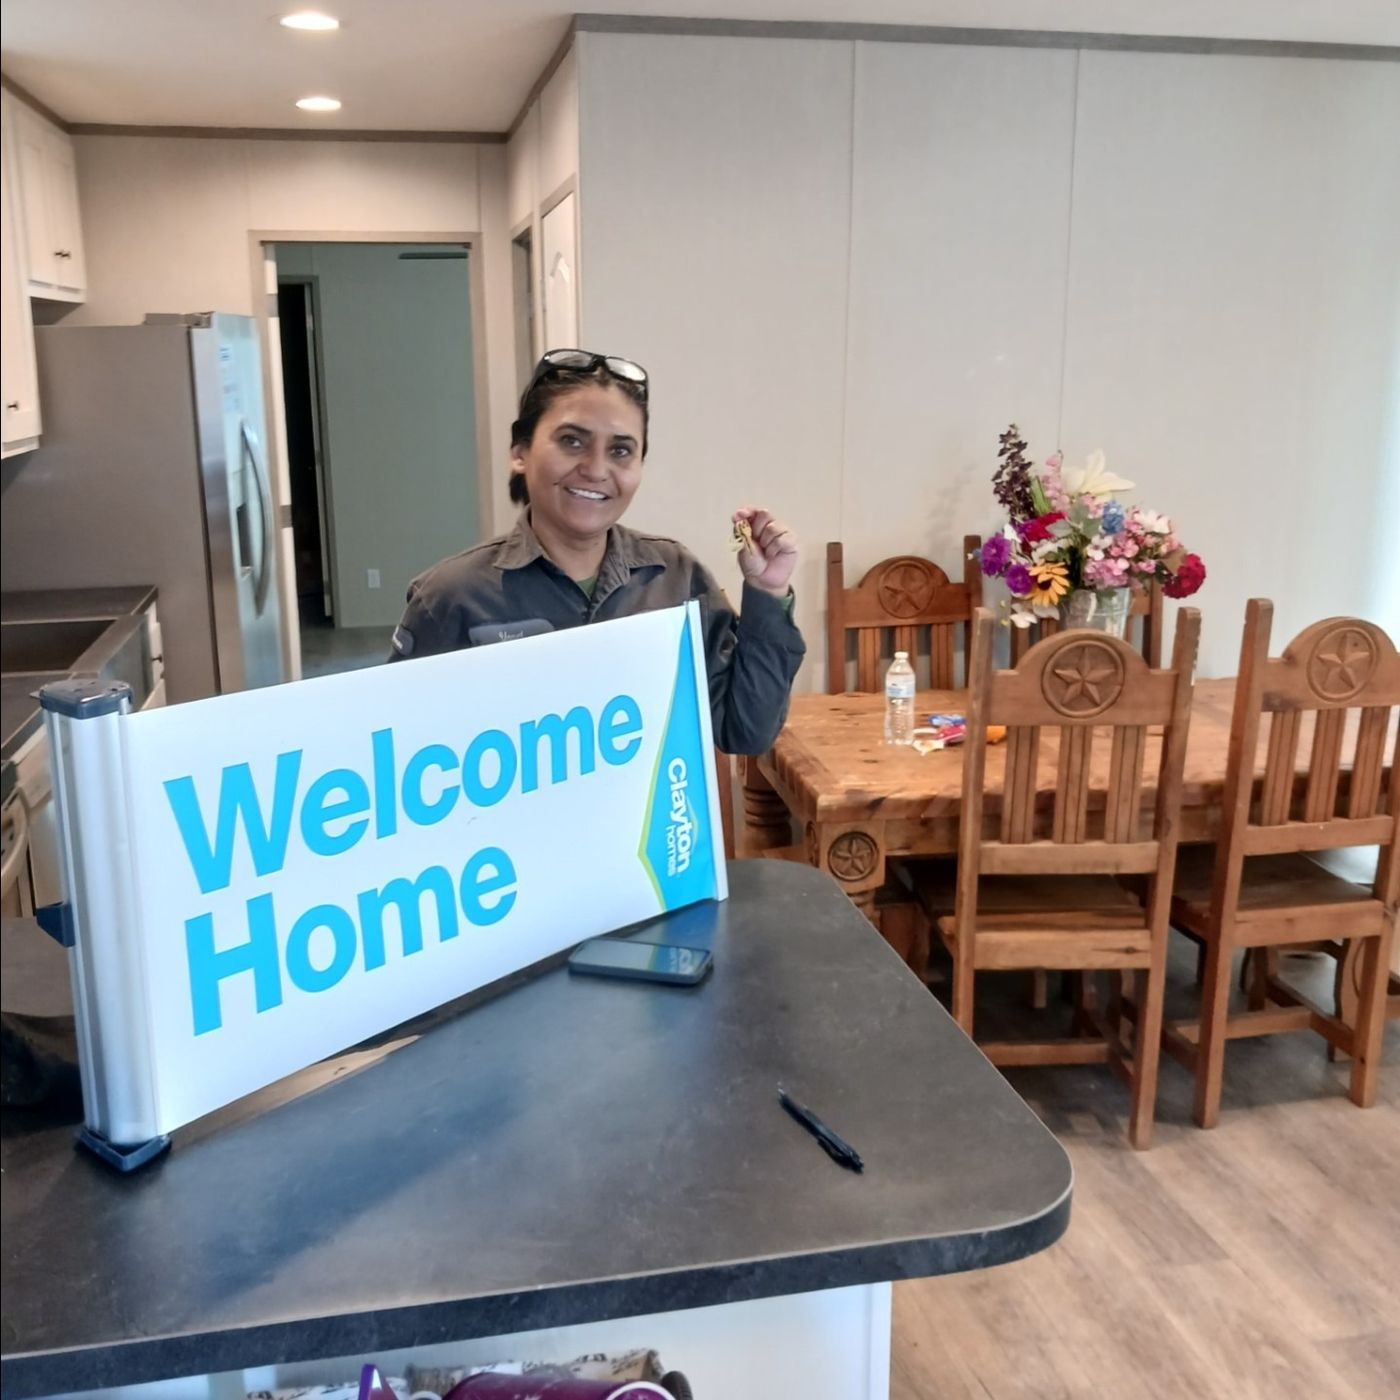 YANET E. welcome home image